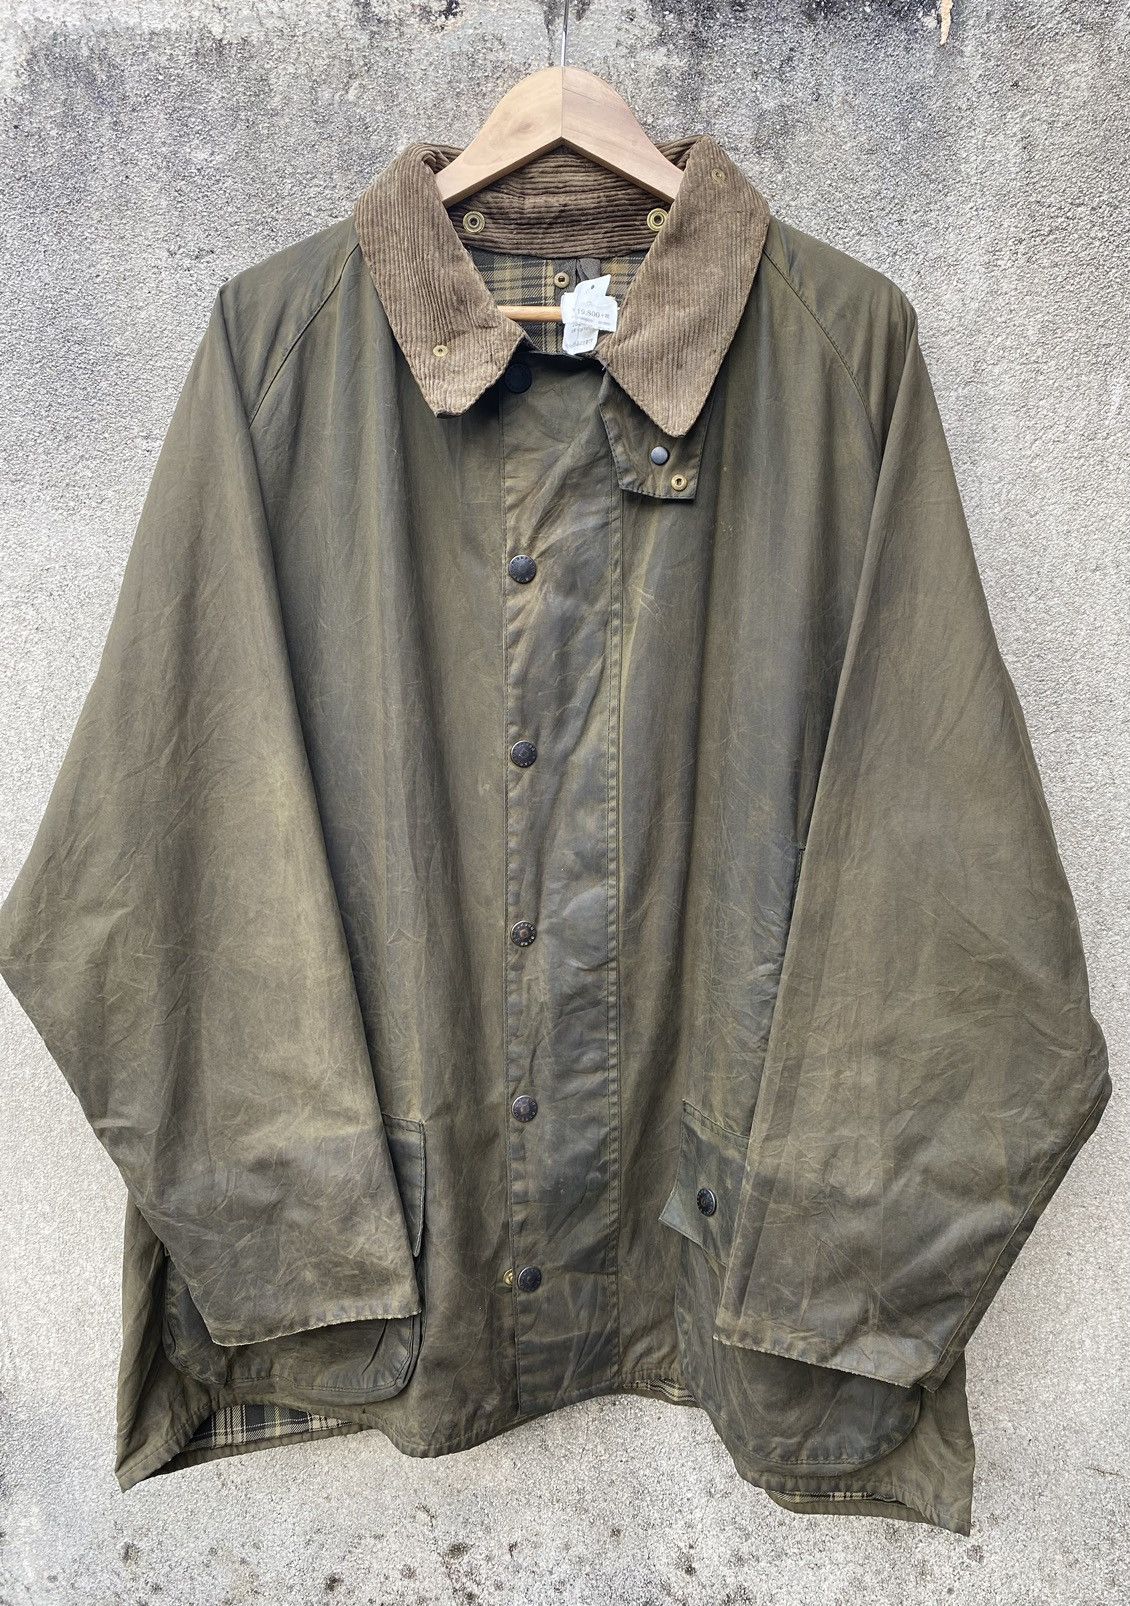 🏴󠁧󠁢󠁥󠁮󠁧󠁿 Vintage Barbour Classic Beaufort Waxed Jacket - 1